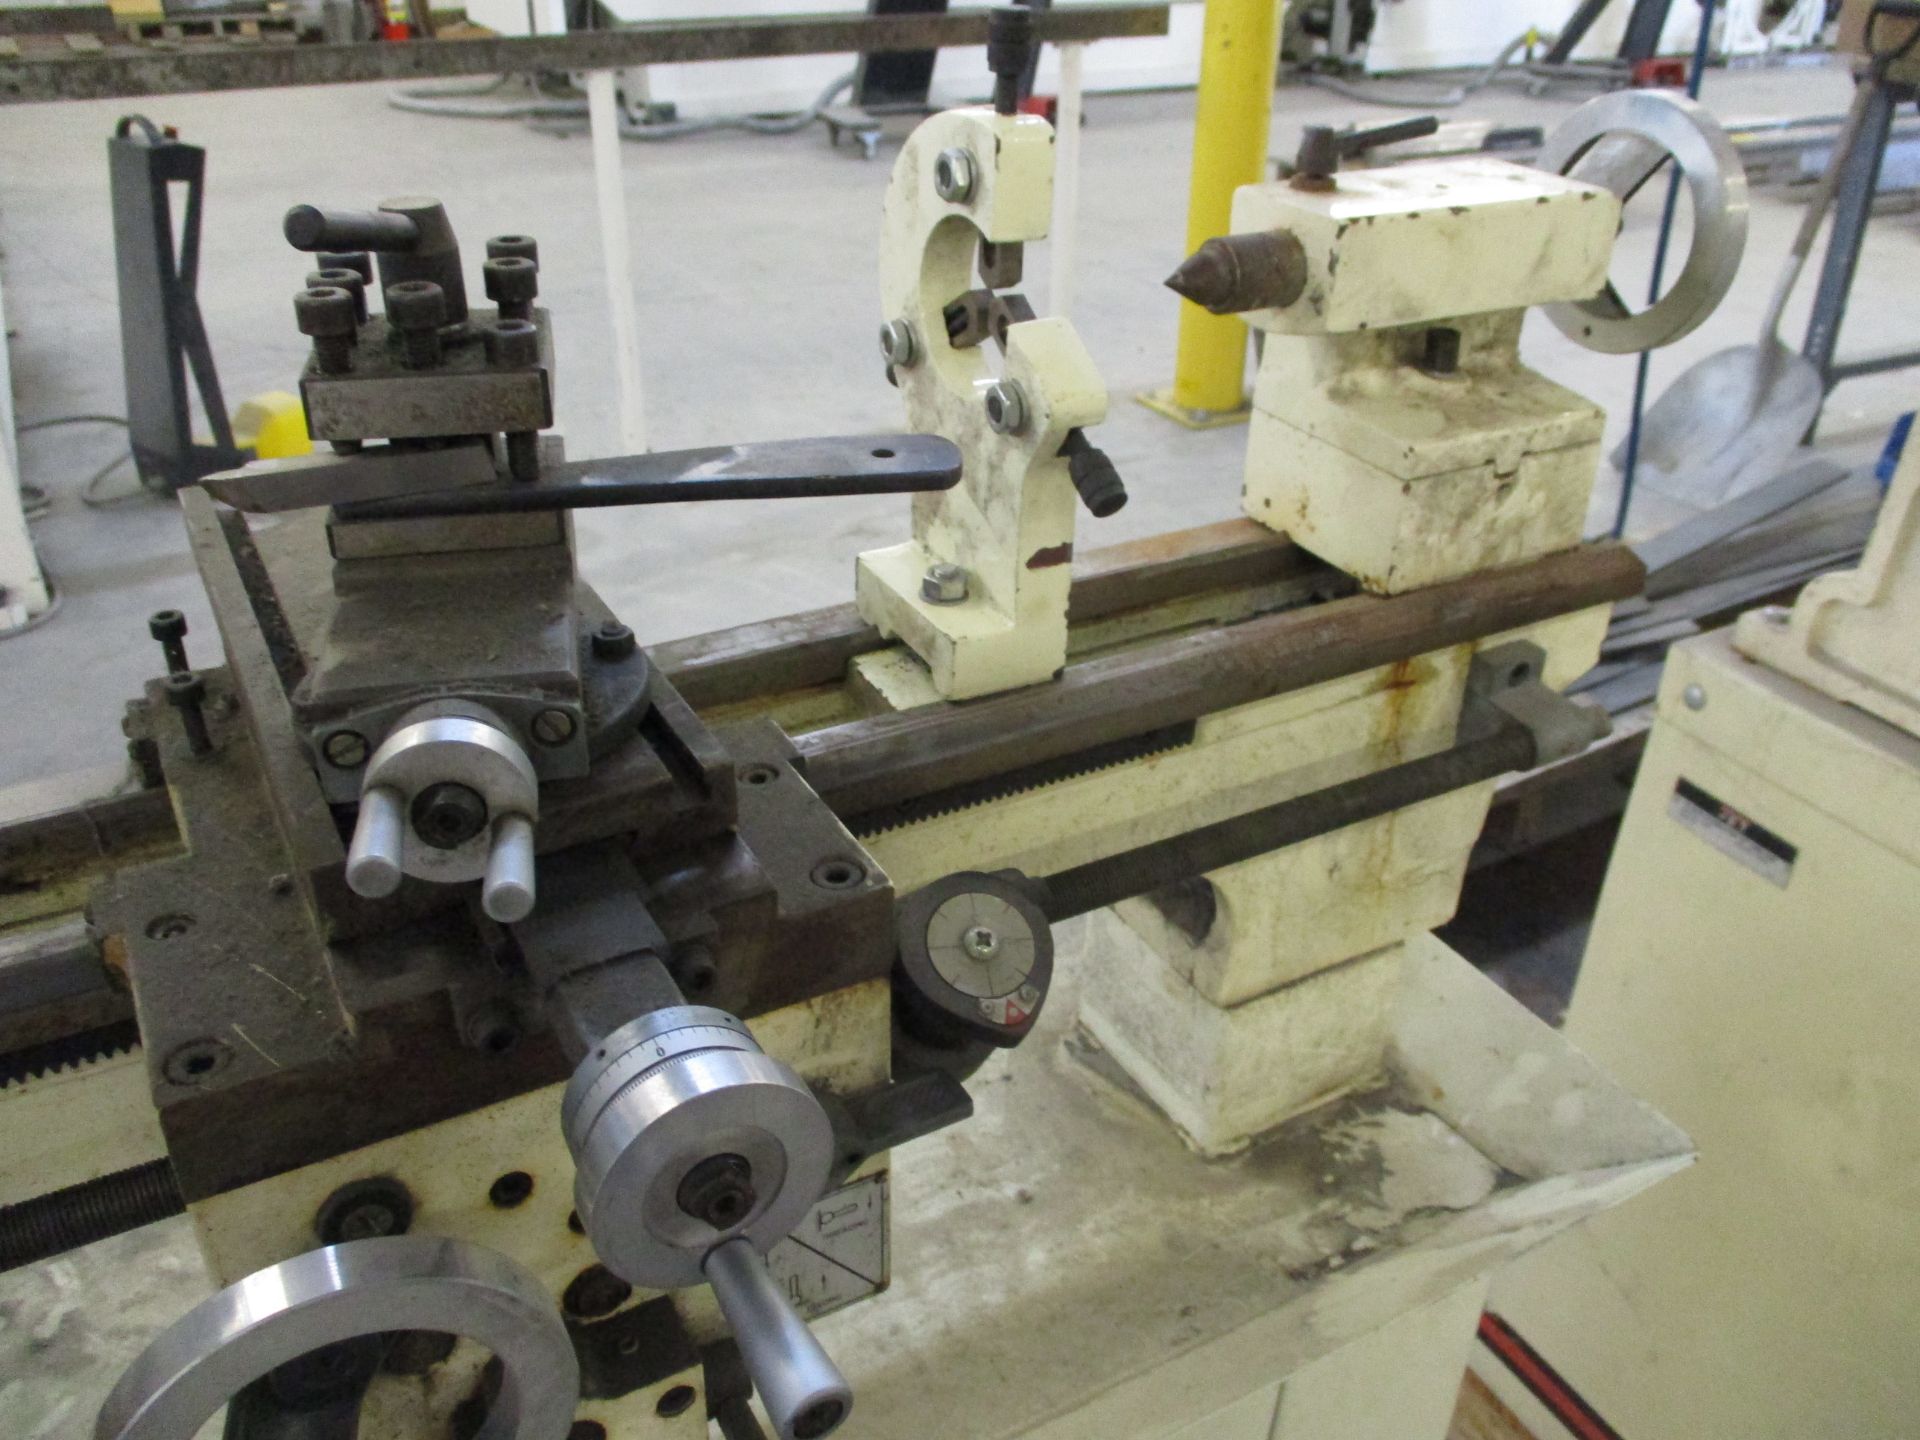 Jet 10" X 18" Lathe, 4" 3-Jaw Chuck, 4-Way Tool Post, Follow Rest, No Tailstock, 110/1/60 - Image 3 of 4